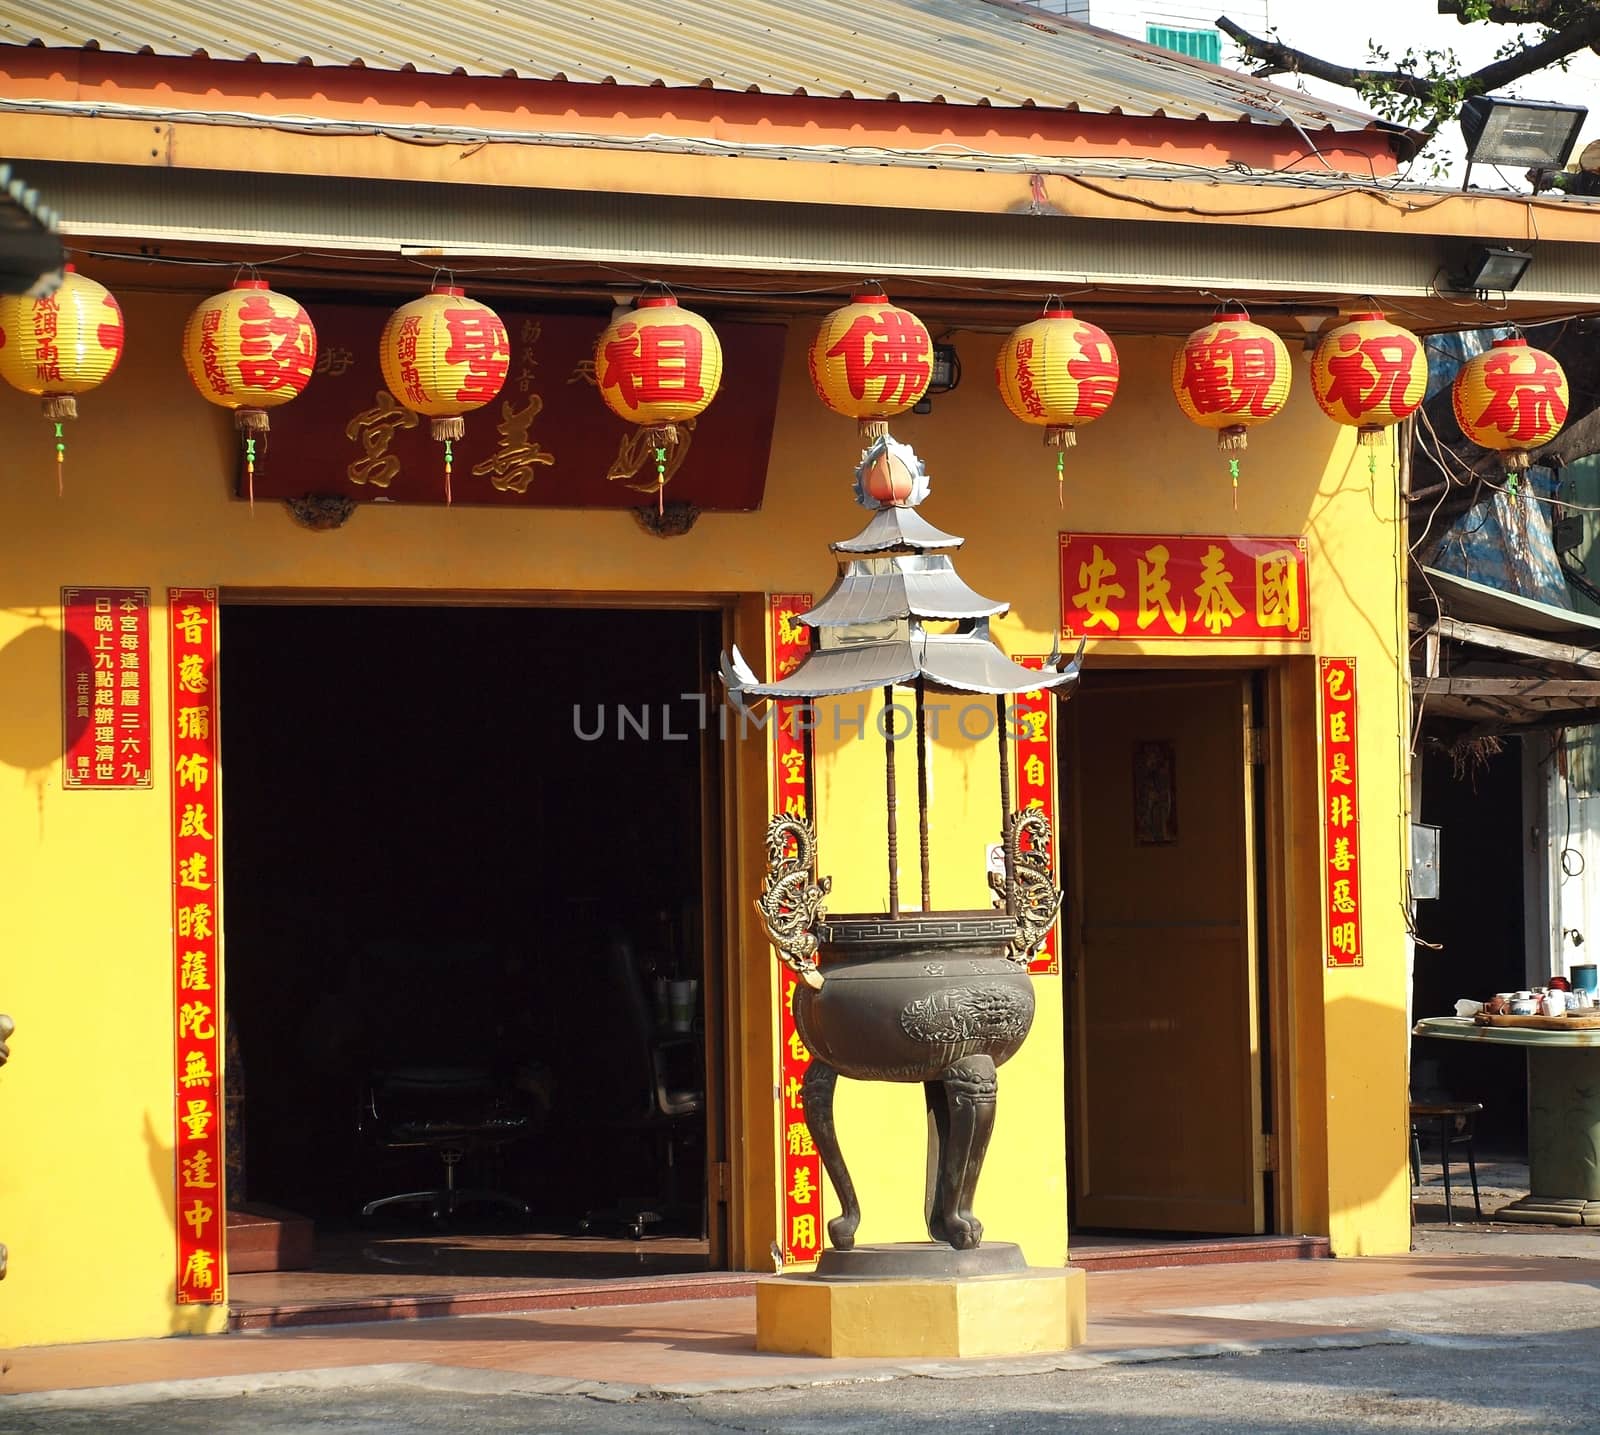 KAOHSIUNG, TAIWAN -- JANUARY 30, 2014: The small Miao-San Temple in Kaohsiung is decorated with colorful lanterns for the Chinese New Year.